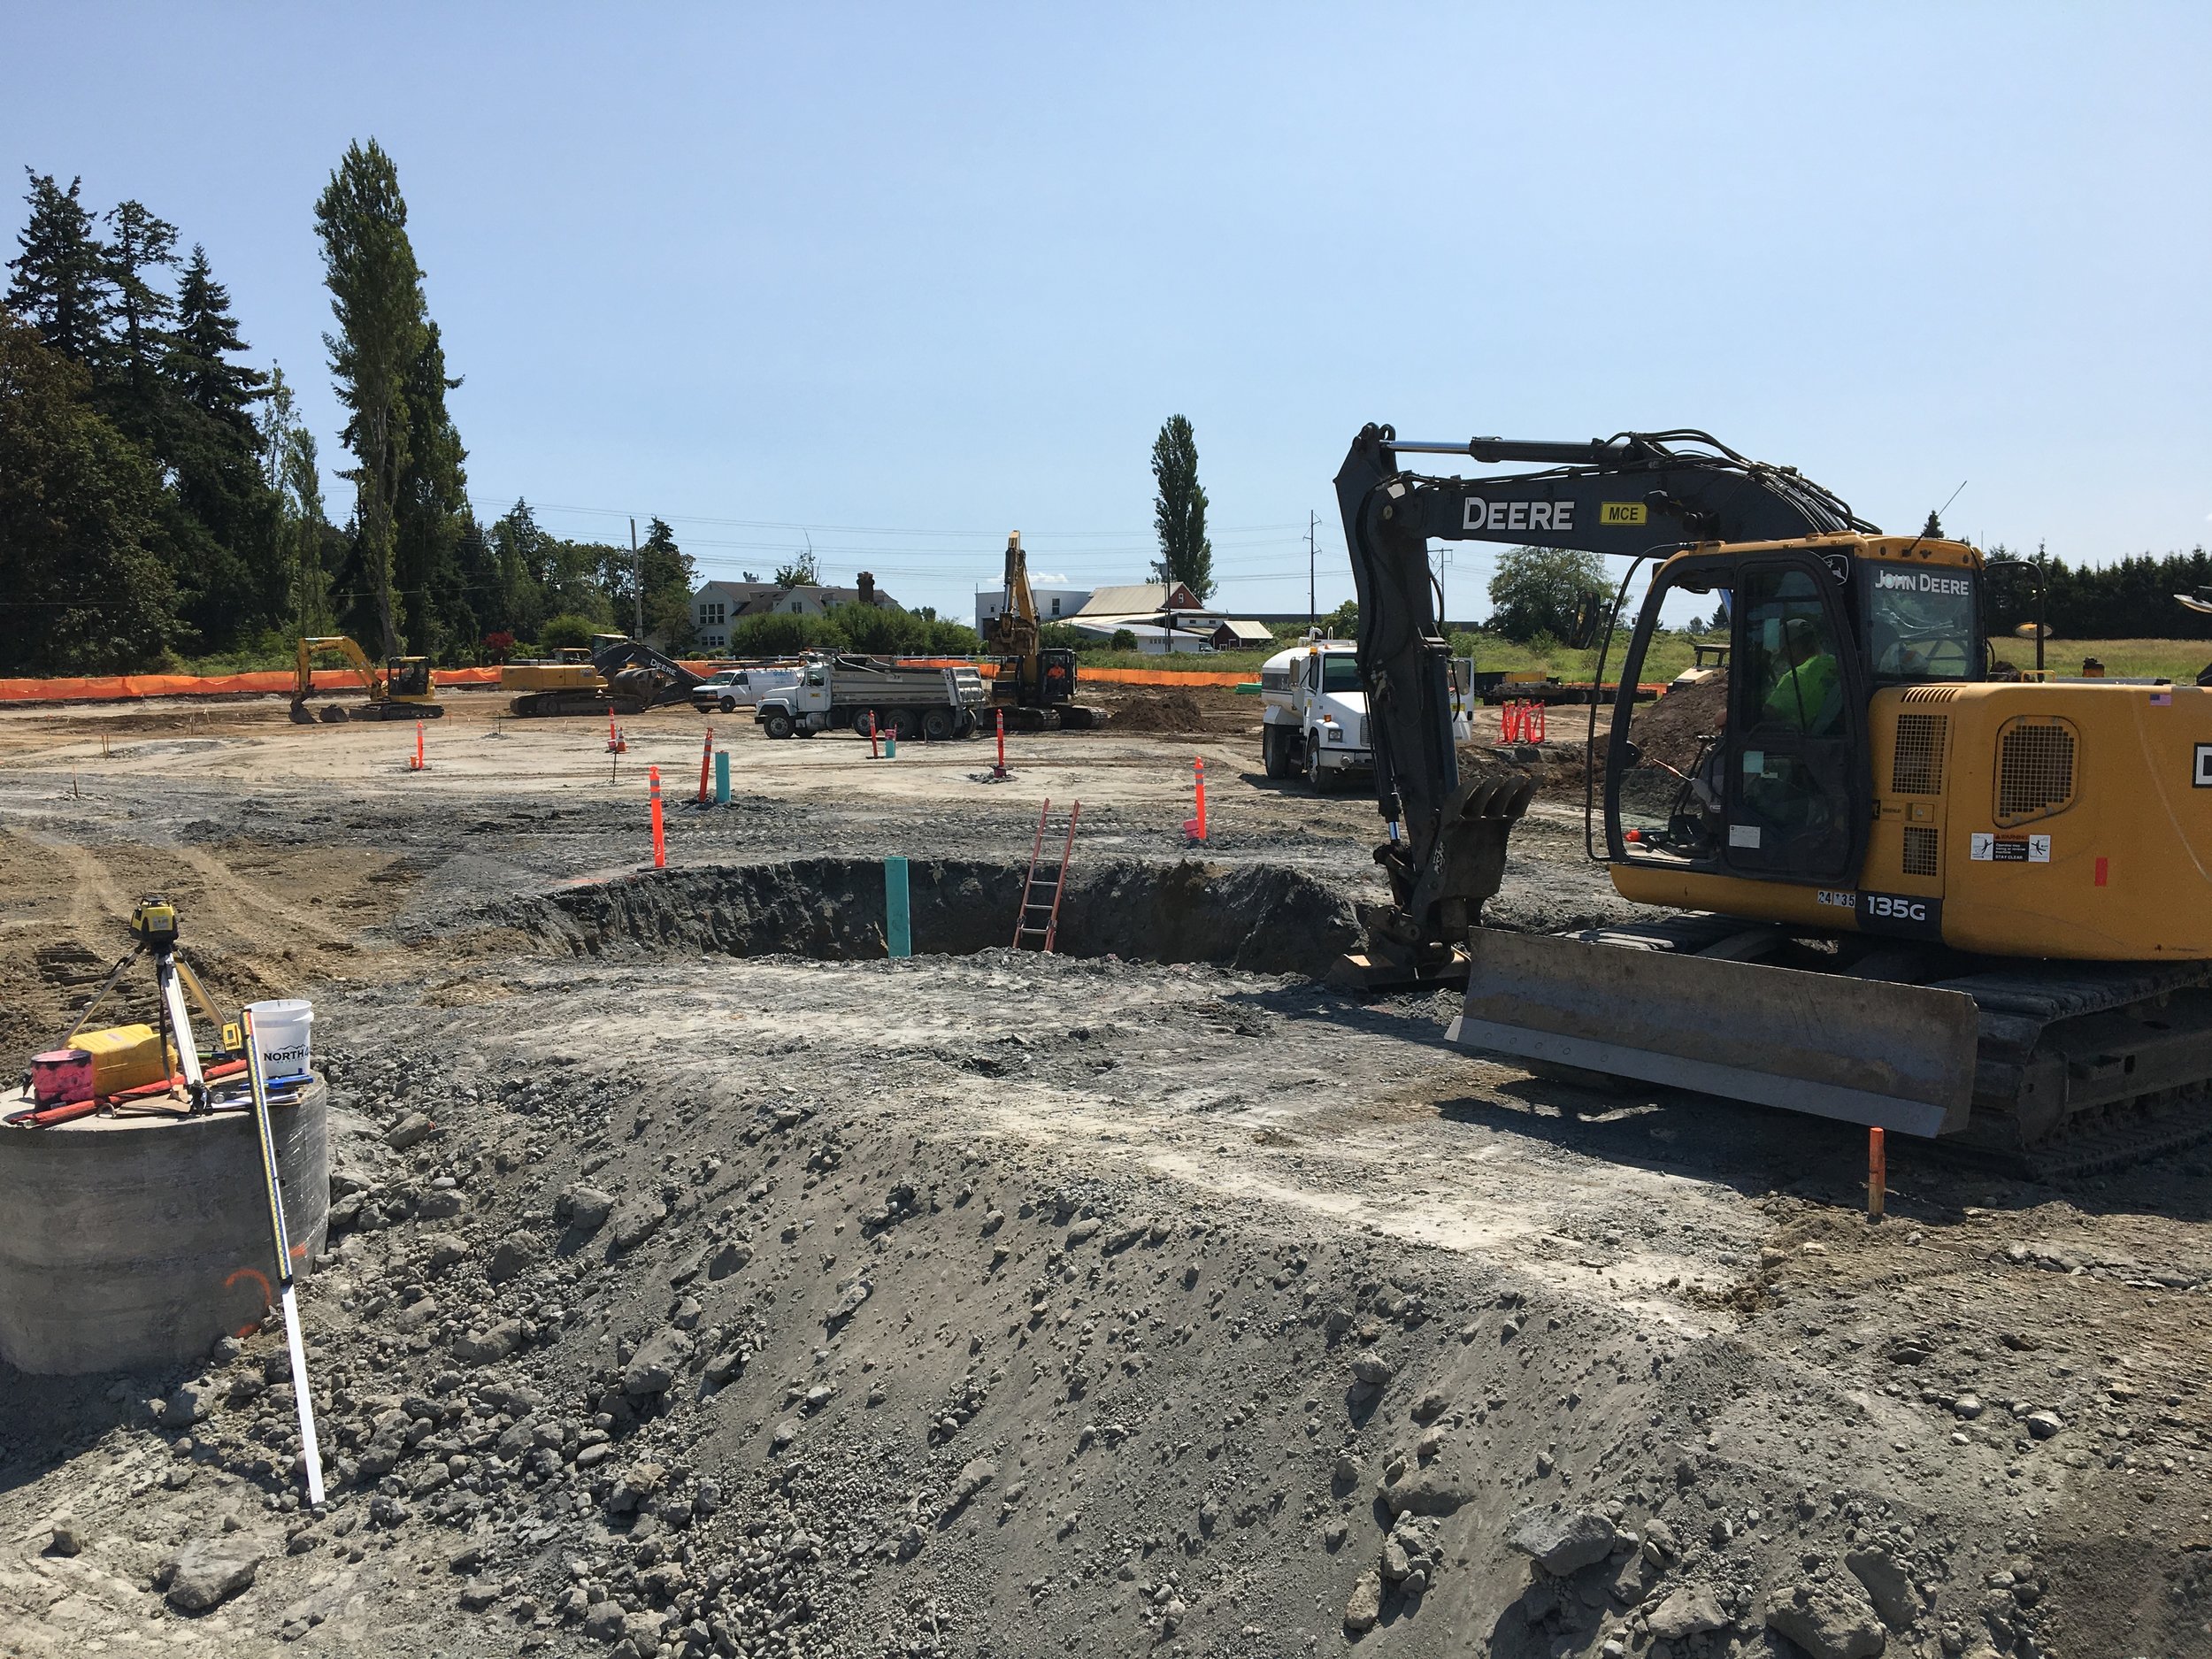 It’s always exciting breaking ground on a new park 🚜 We just got started on the new Lake Stevens, Washington skatepark 💪🏽 